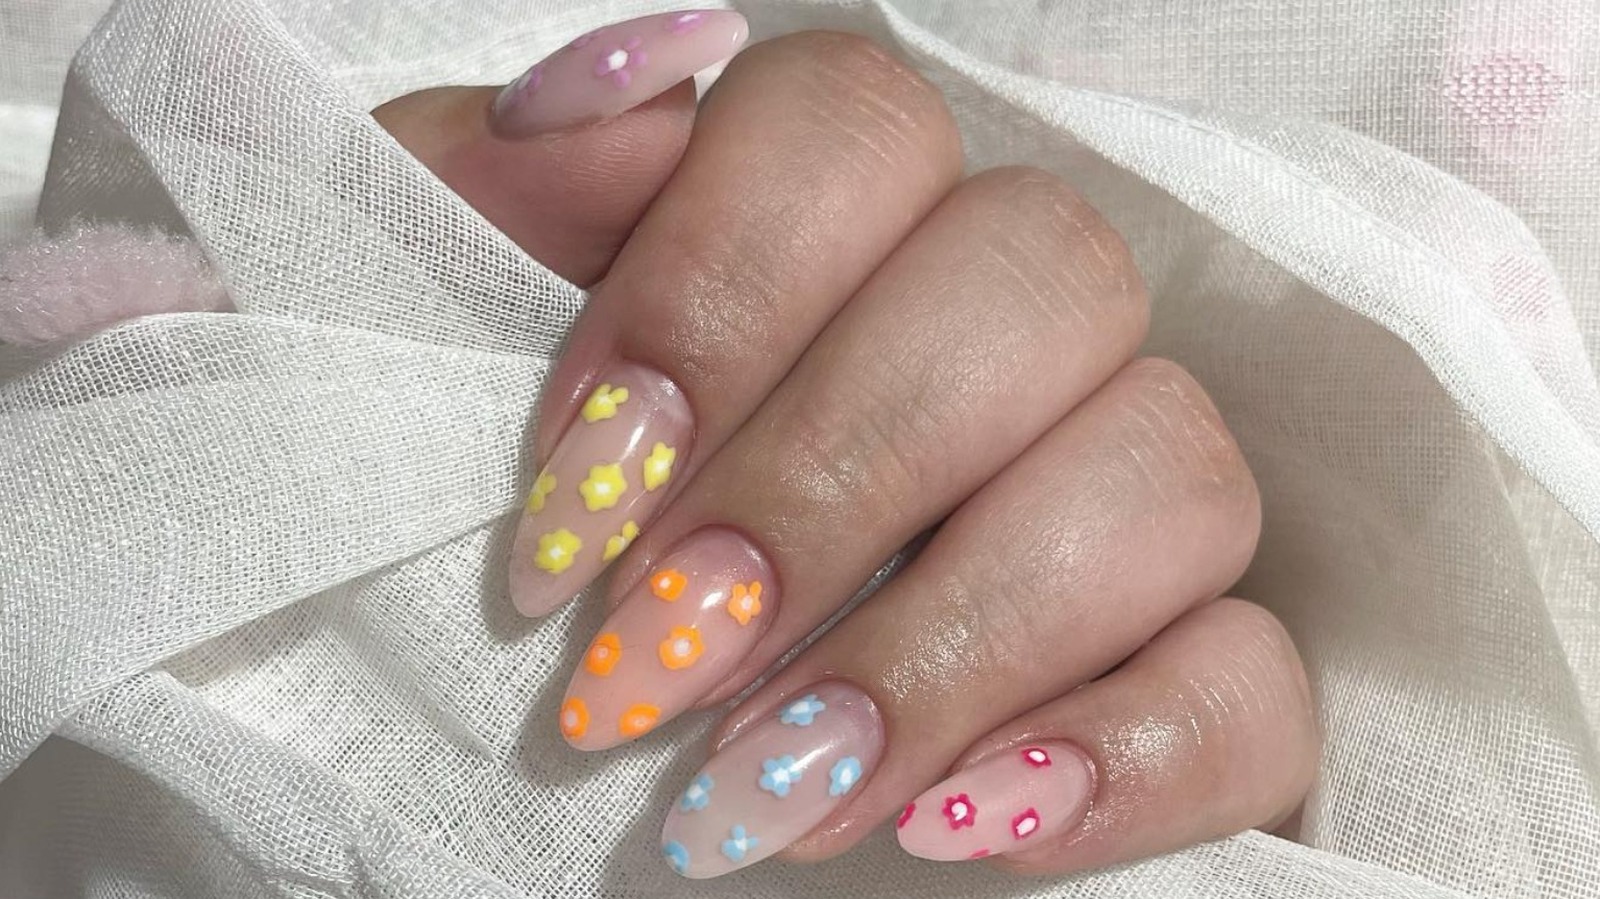 7 Best 2021 Nail Trends, Designs, and Manicure Ideas to Copy ASAP